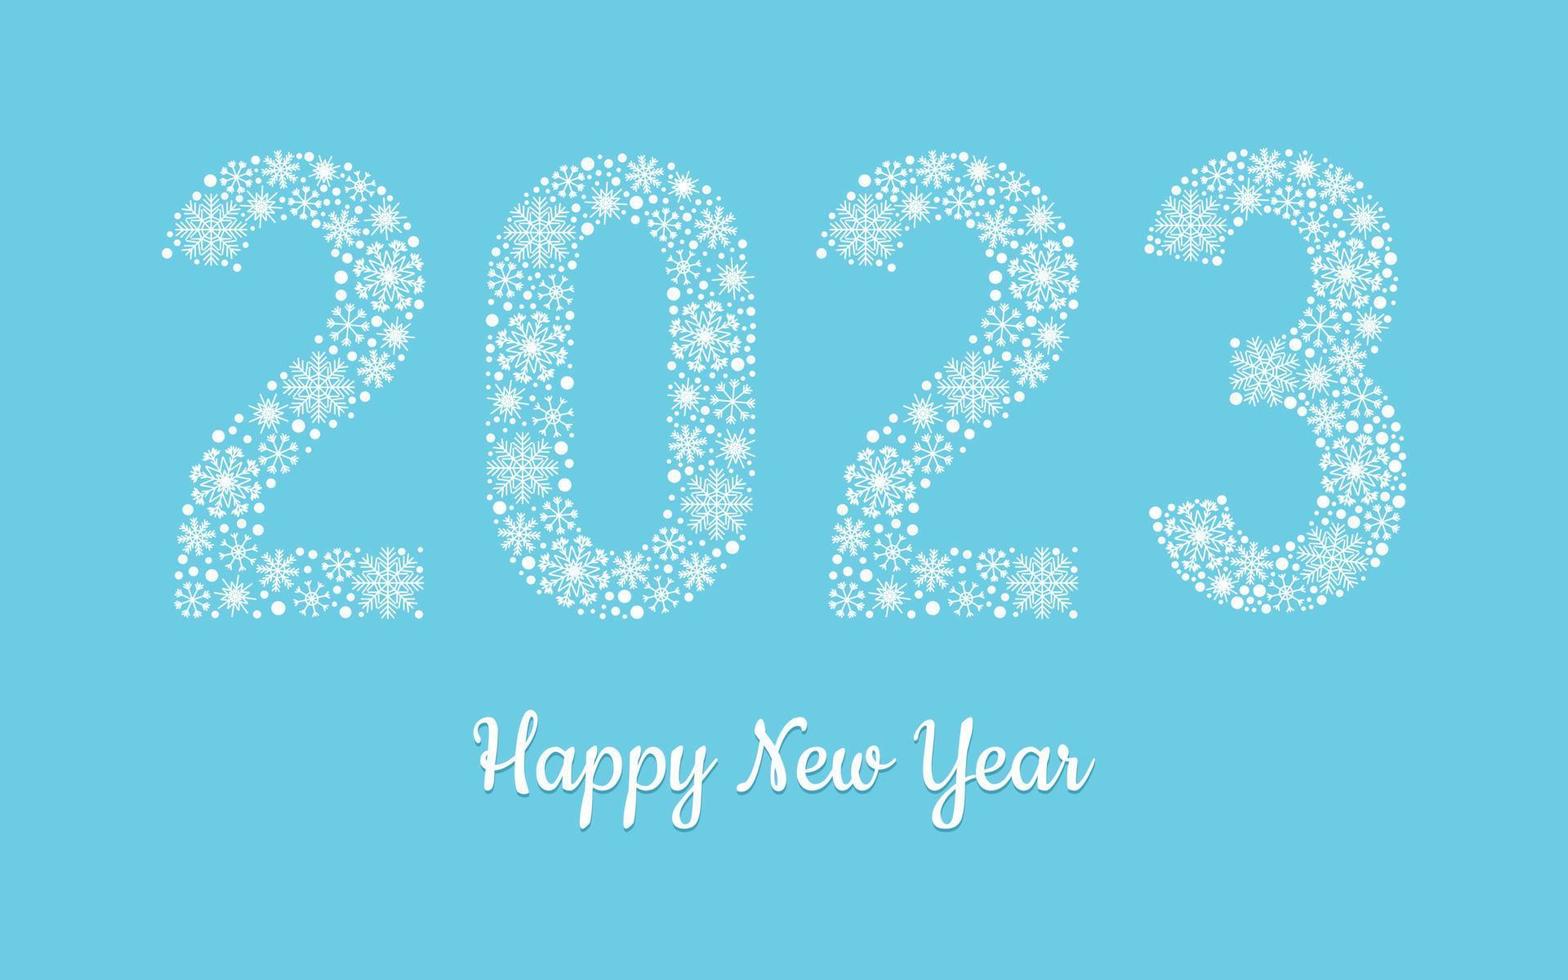 Happy New Year 2023 number made from snowflakes on blue background vector